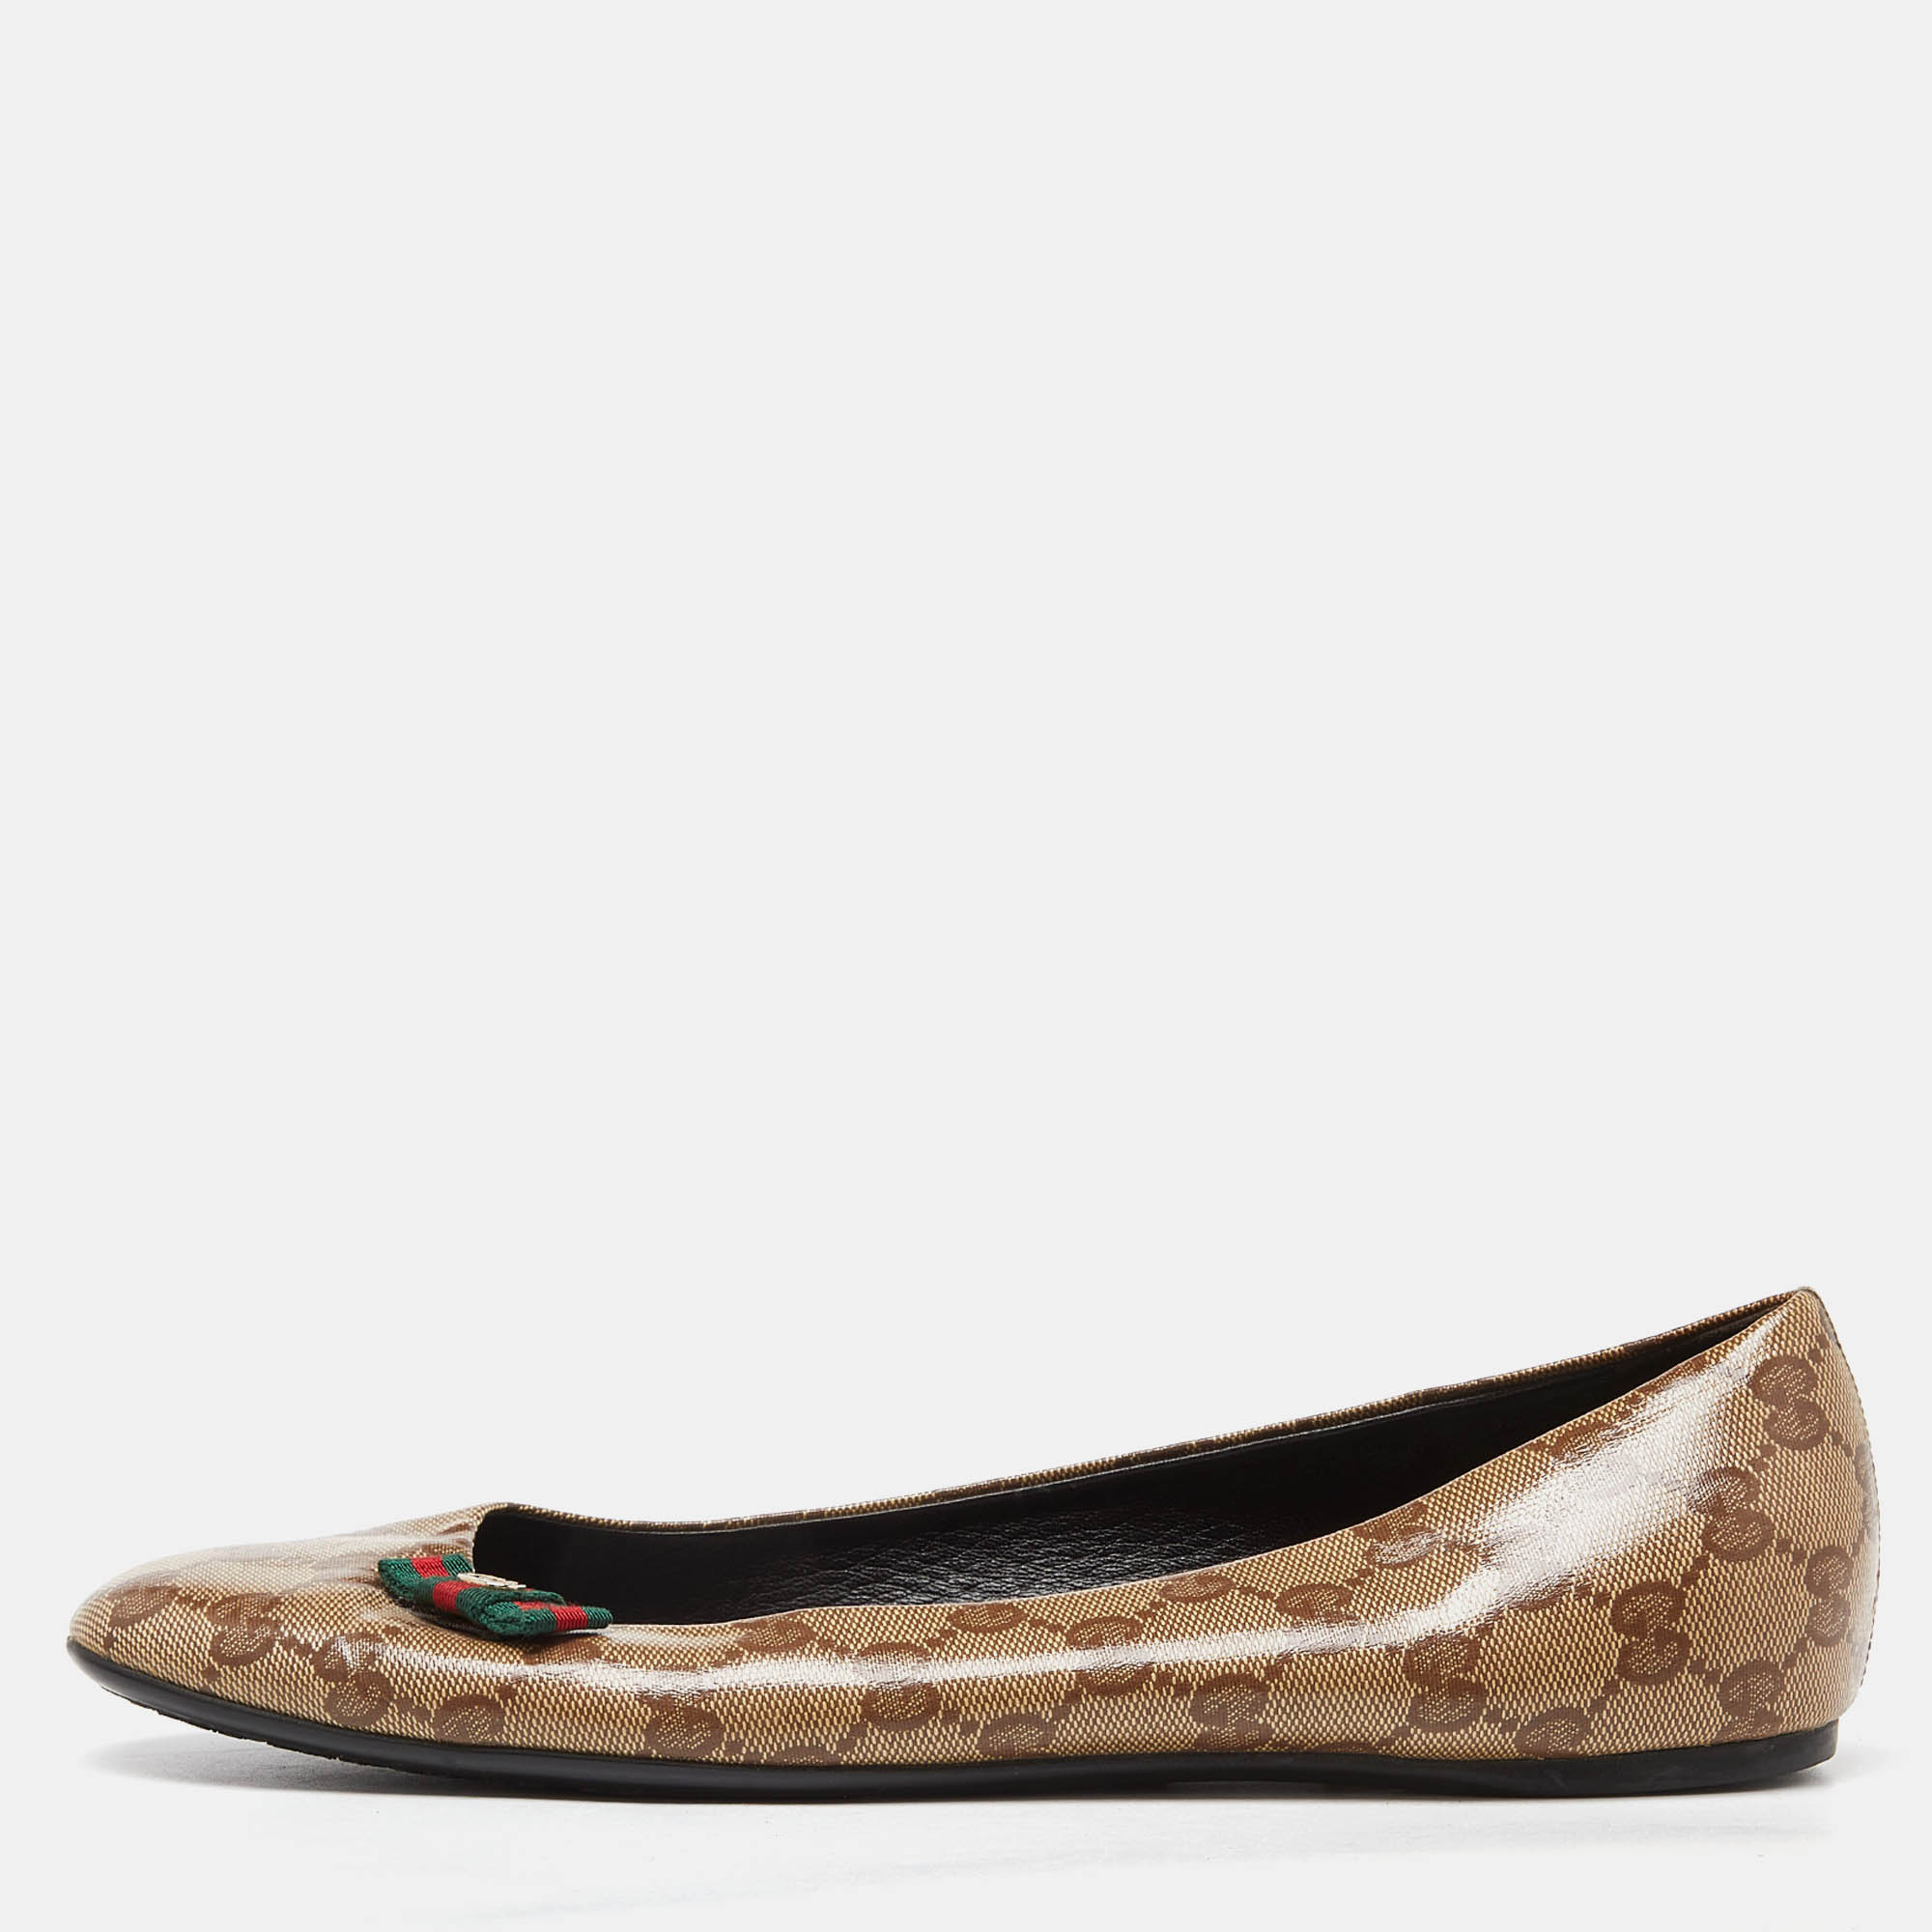 Gucci brown/beige gg crystal canvas web bow ballet flats size 40.5